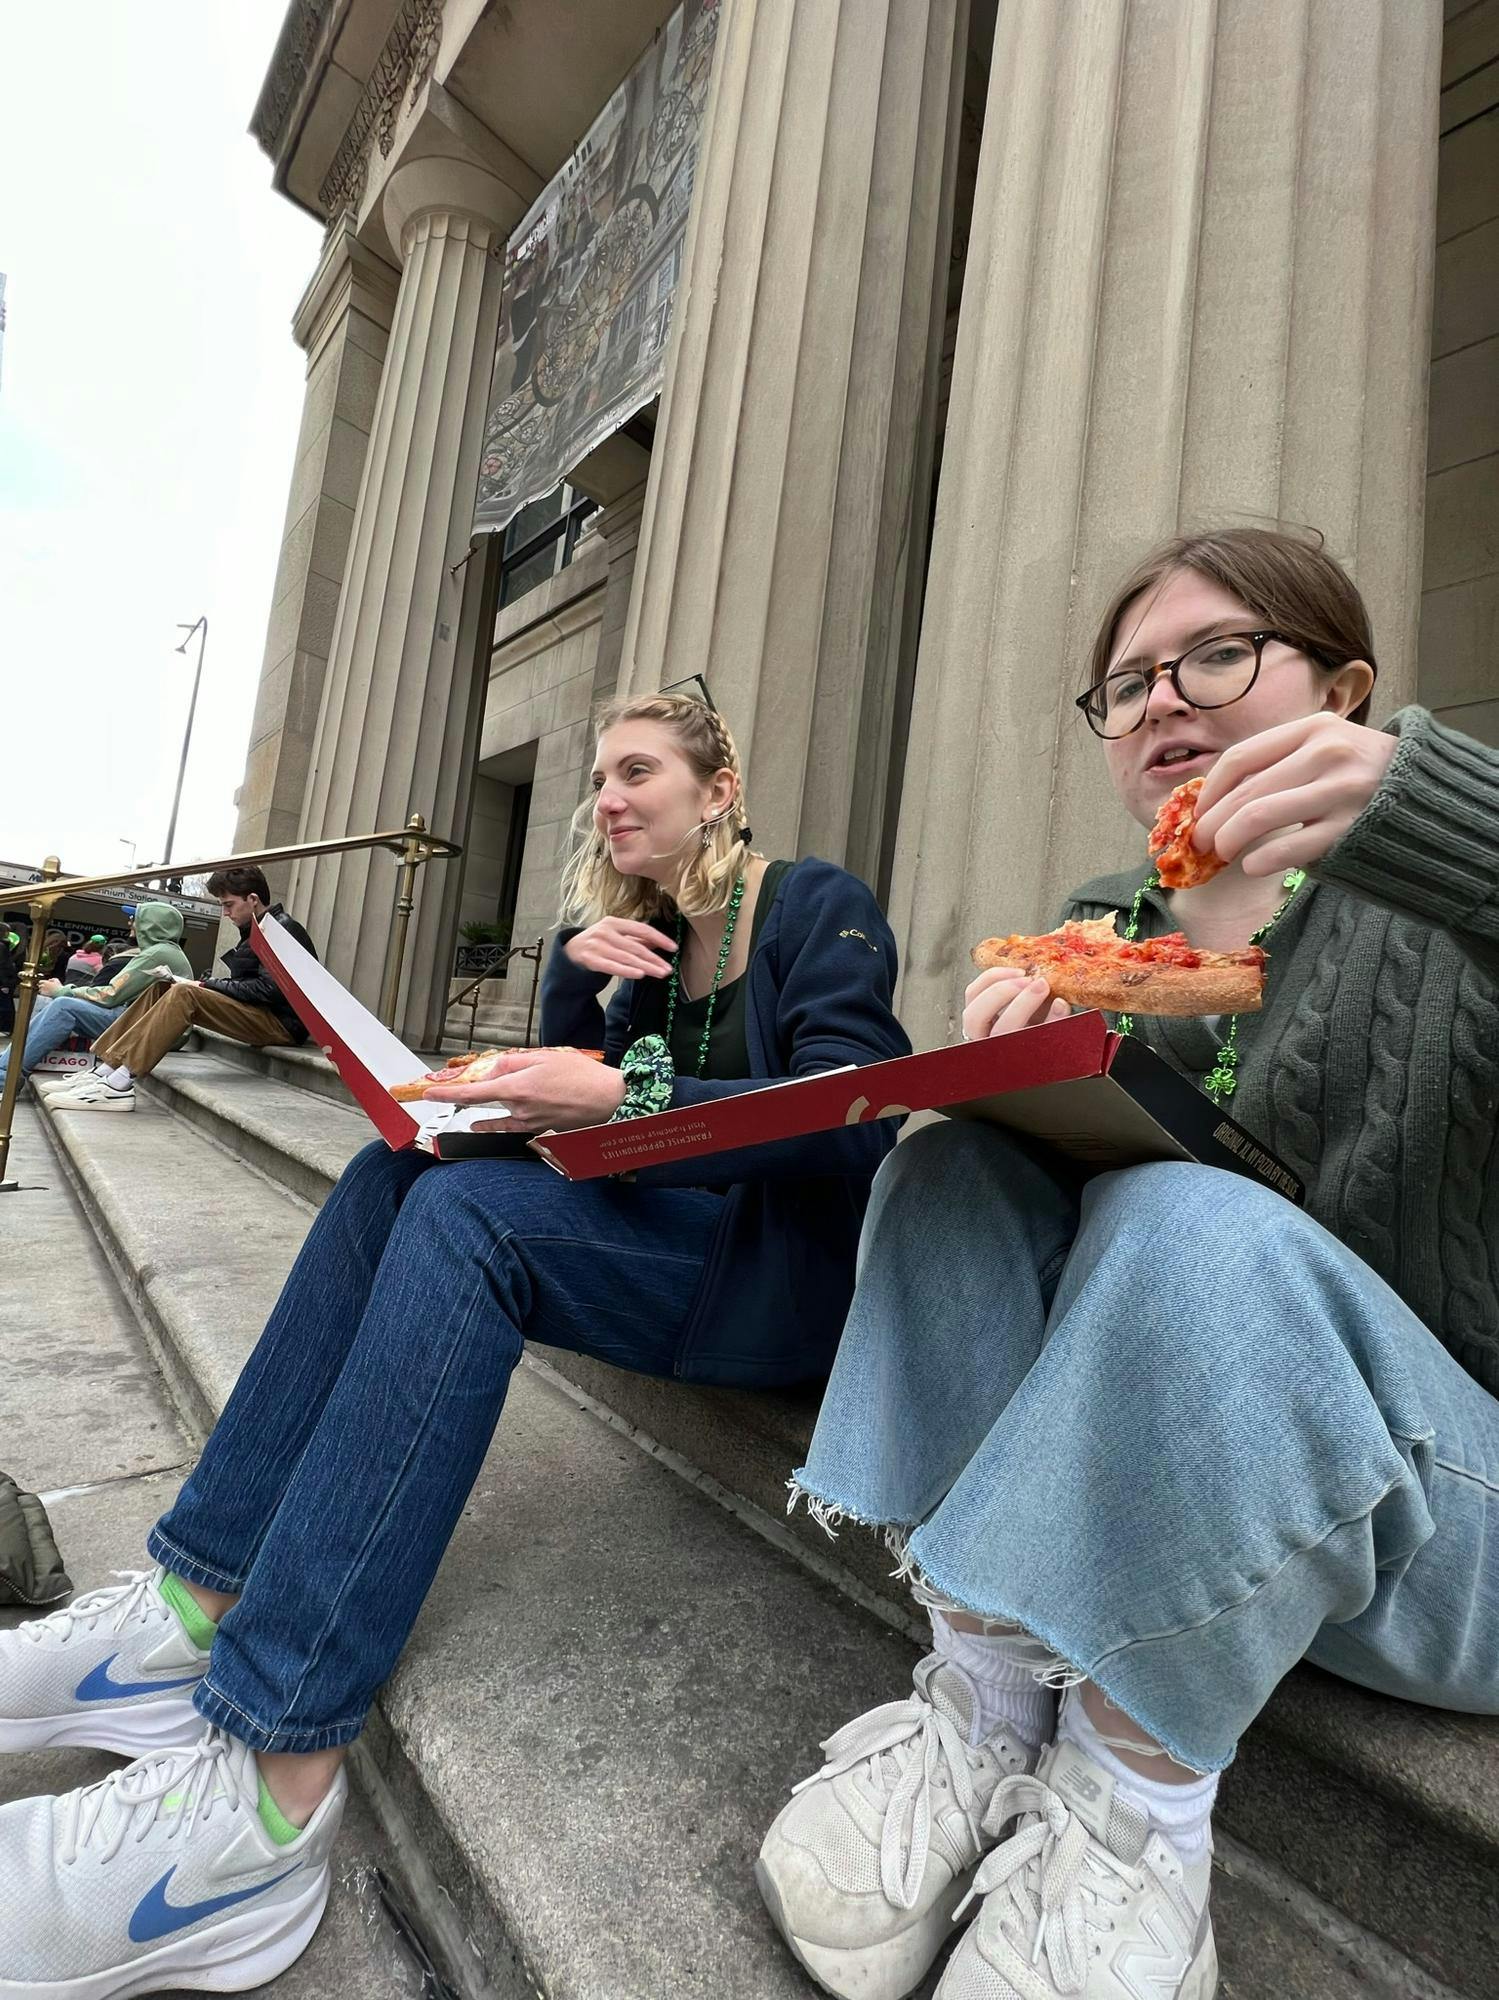 The author and friend eat pizza on the steps outside of Millenium Station, in a moment of low morale, just before a gust of wind blows away their boxes.